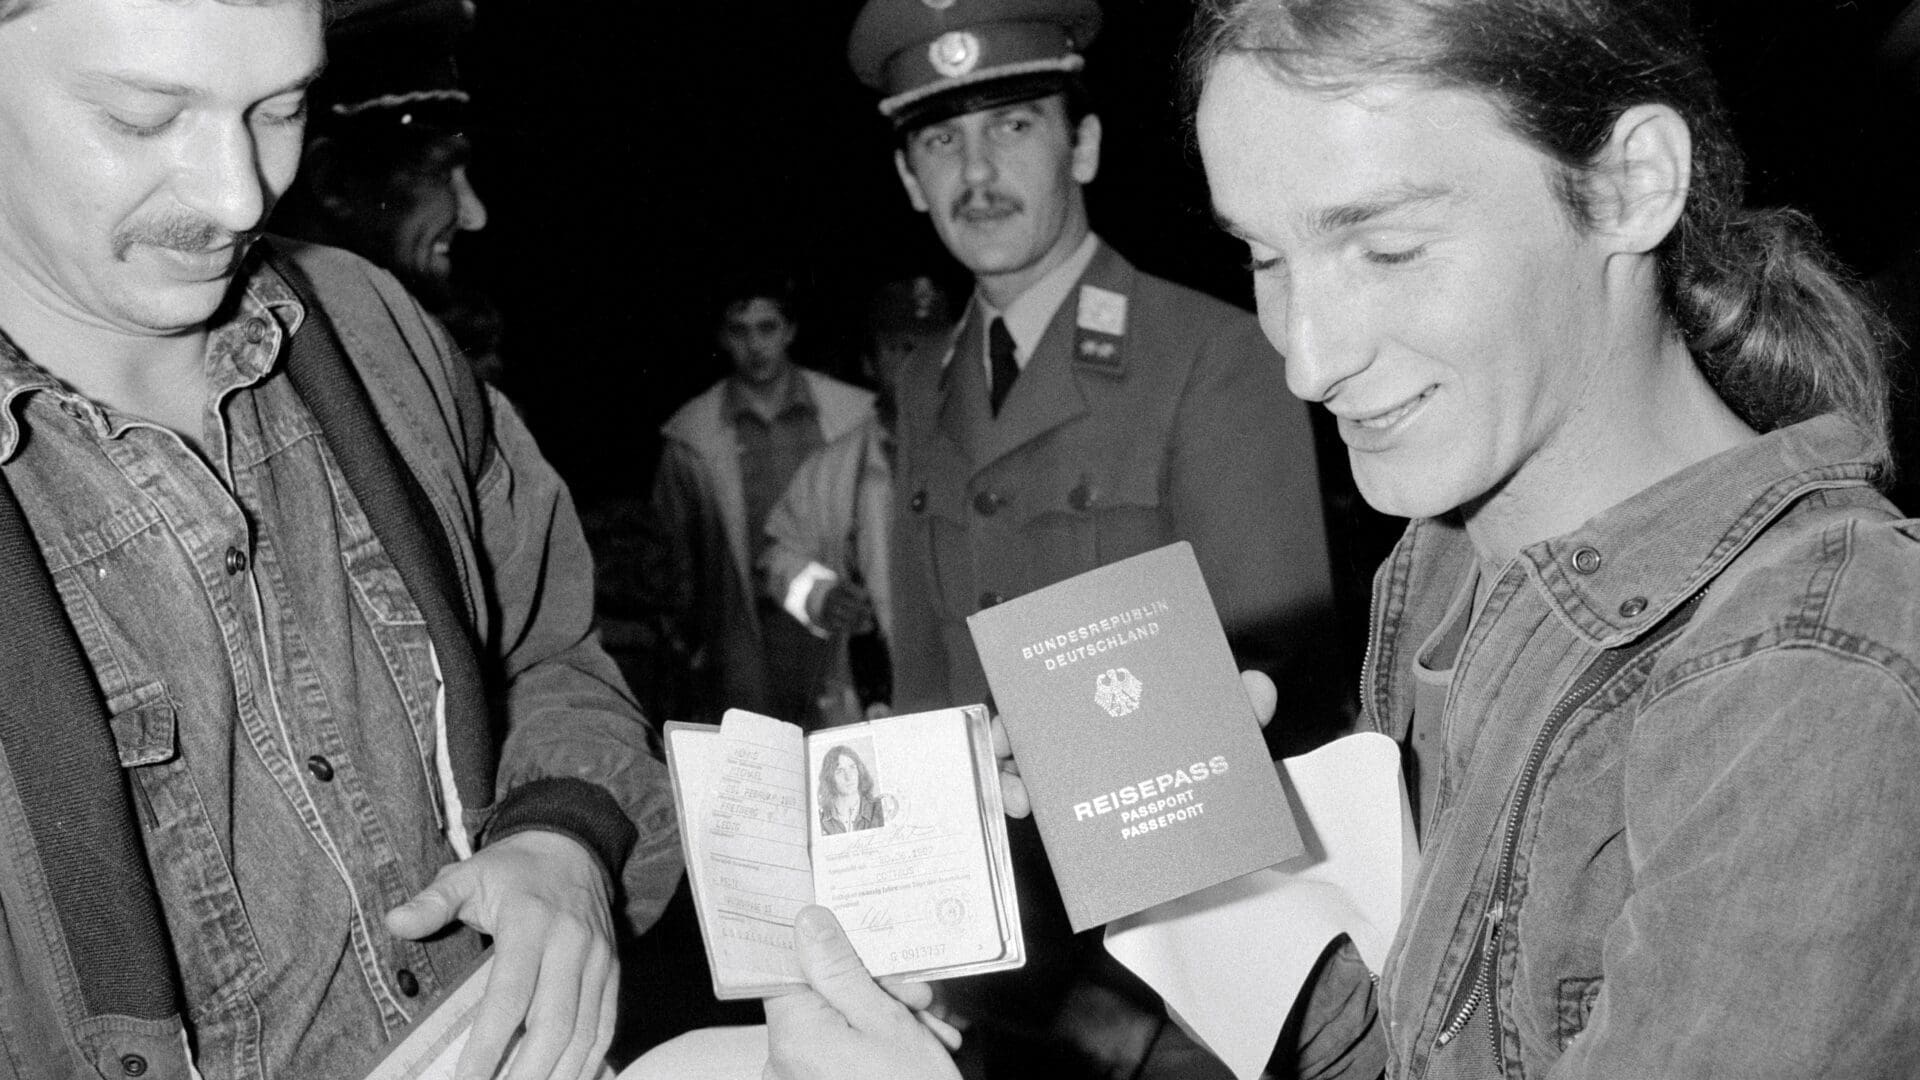 East German refugee, with a Hungarian border guard looking on, showing his documents before he is allowed to leave for West Germany through Austria.